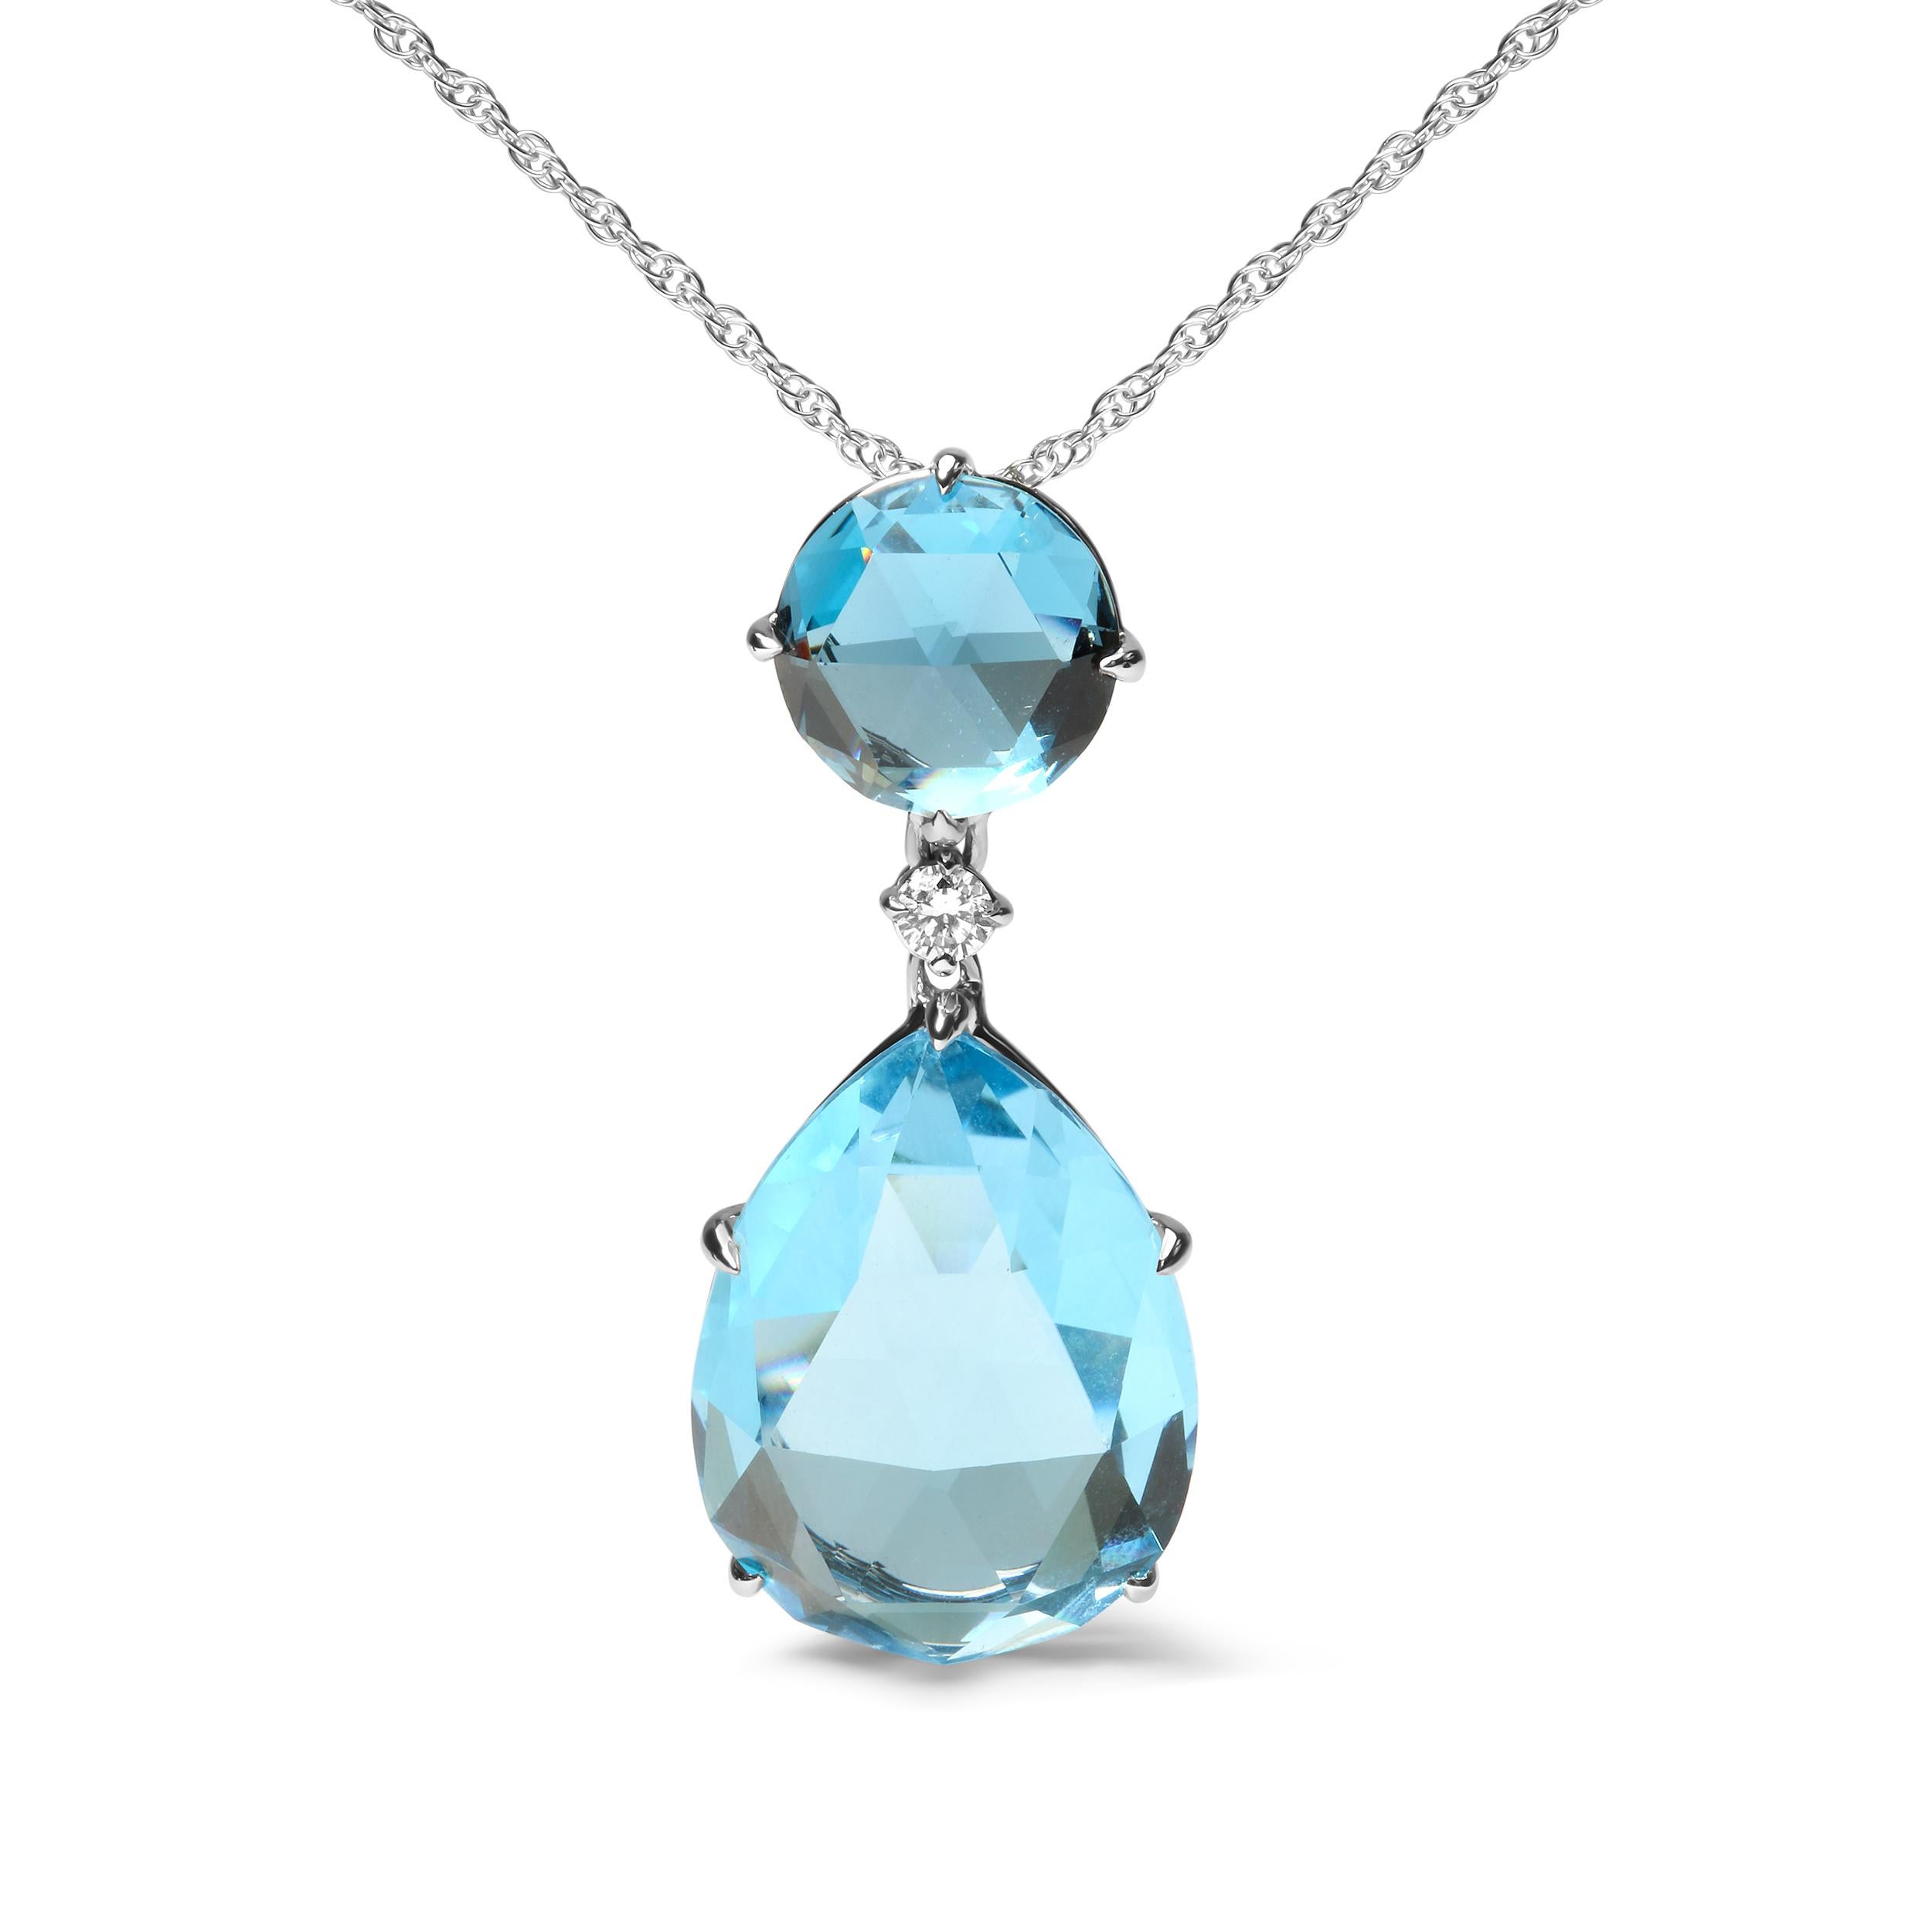 This sparkling 18k white gold pendant necklace is a perfect November gift with two topaz birthstones. The bail consists of a natural 10x10mm round London blue topaz in a prong setting. Below nestles a prong-set round diamond accent stone with an